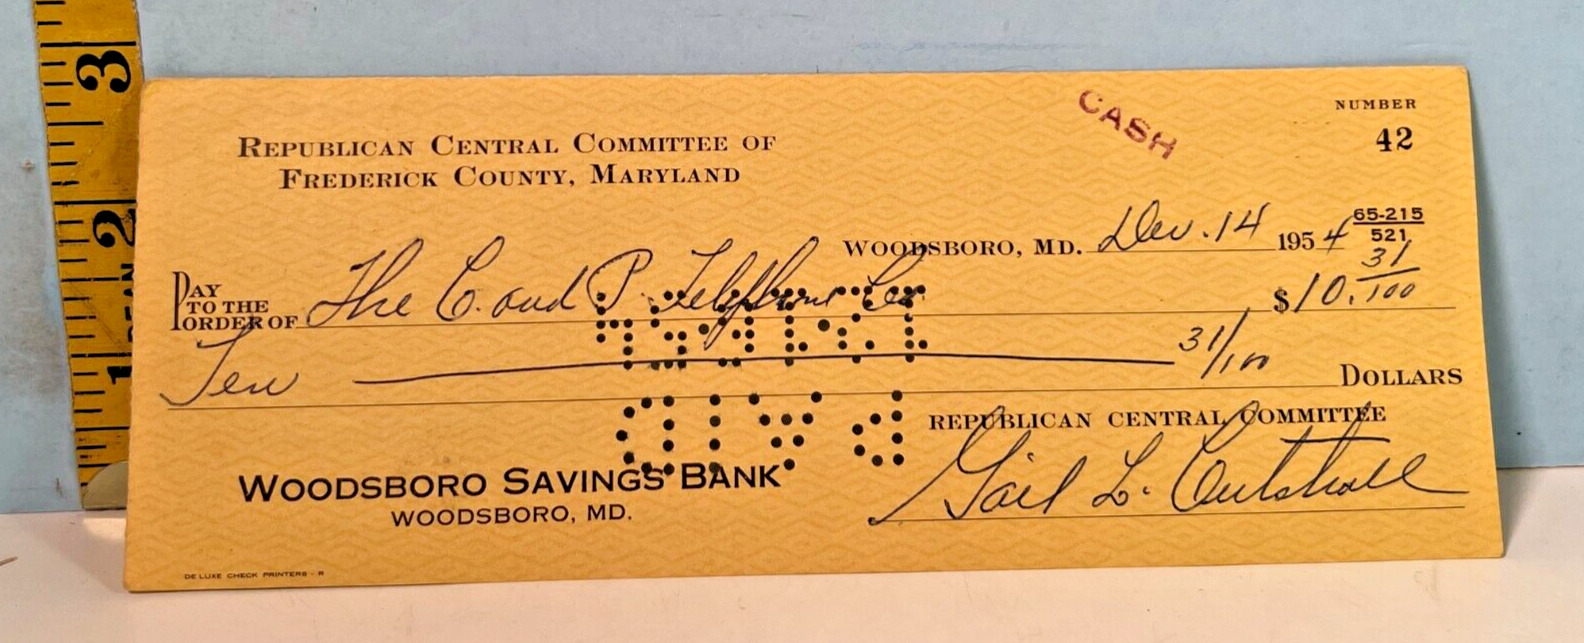 1954 Republican Central Committee of Frederick County Maryland Canceled Check